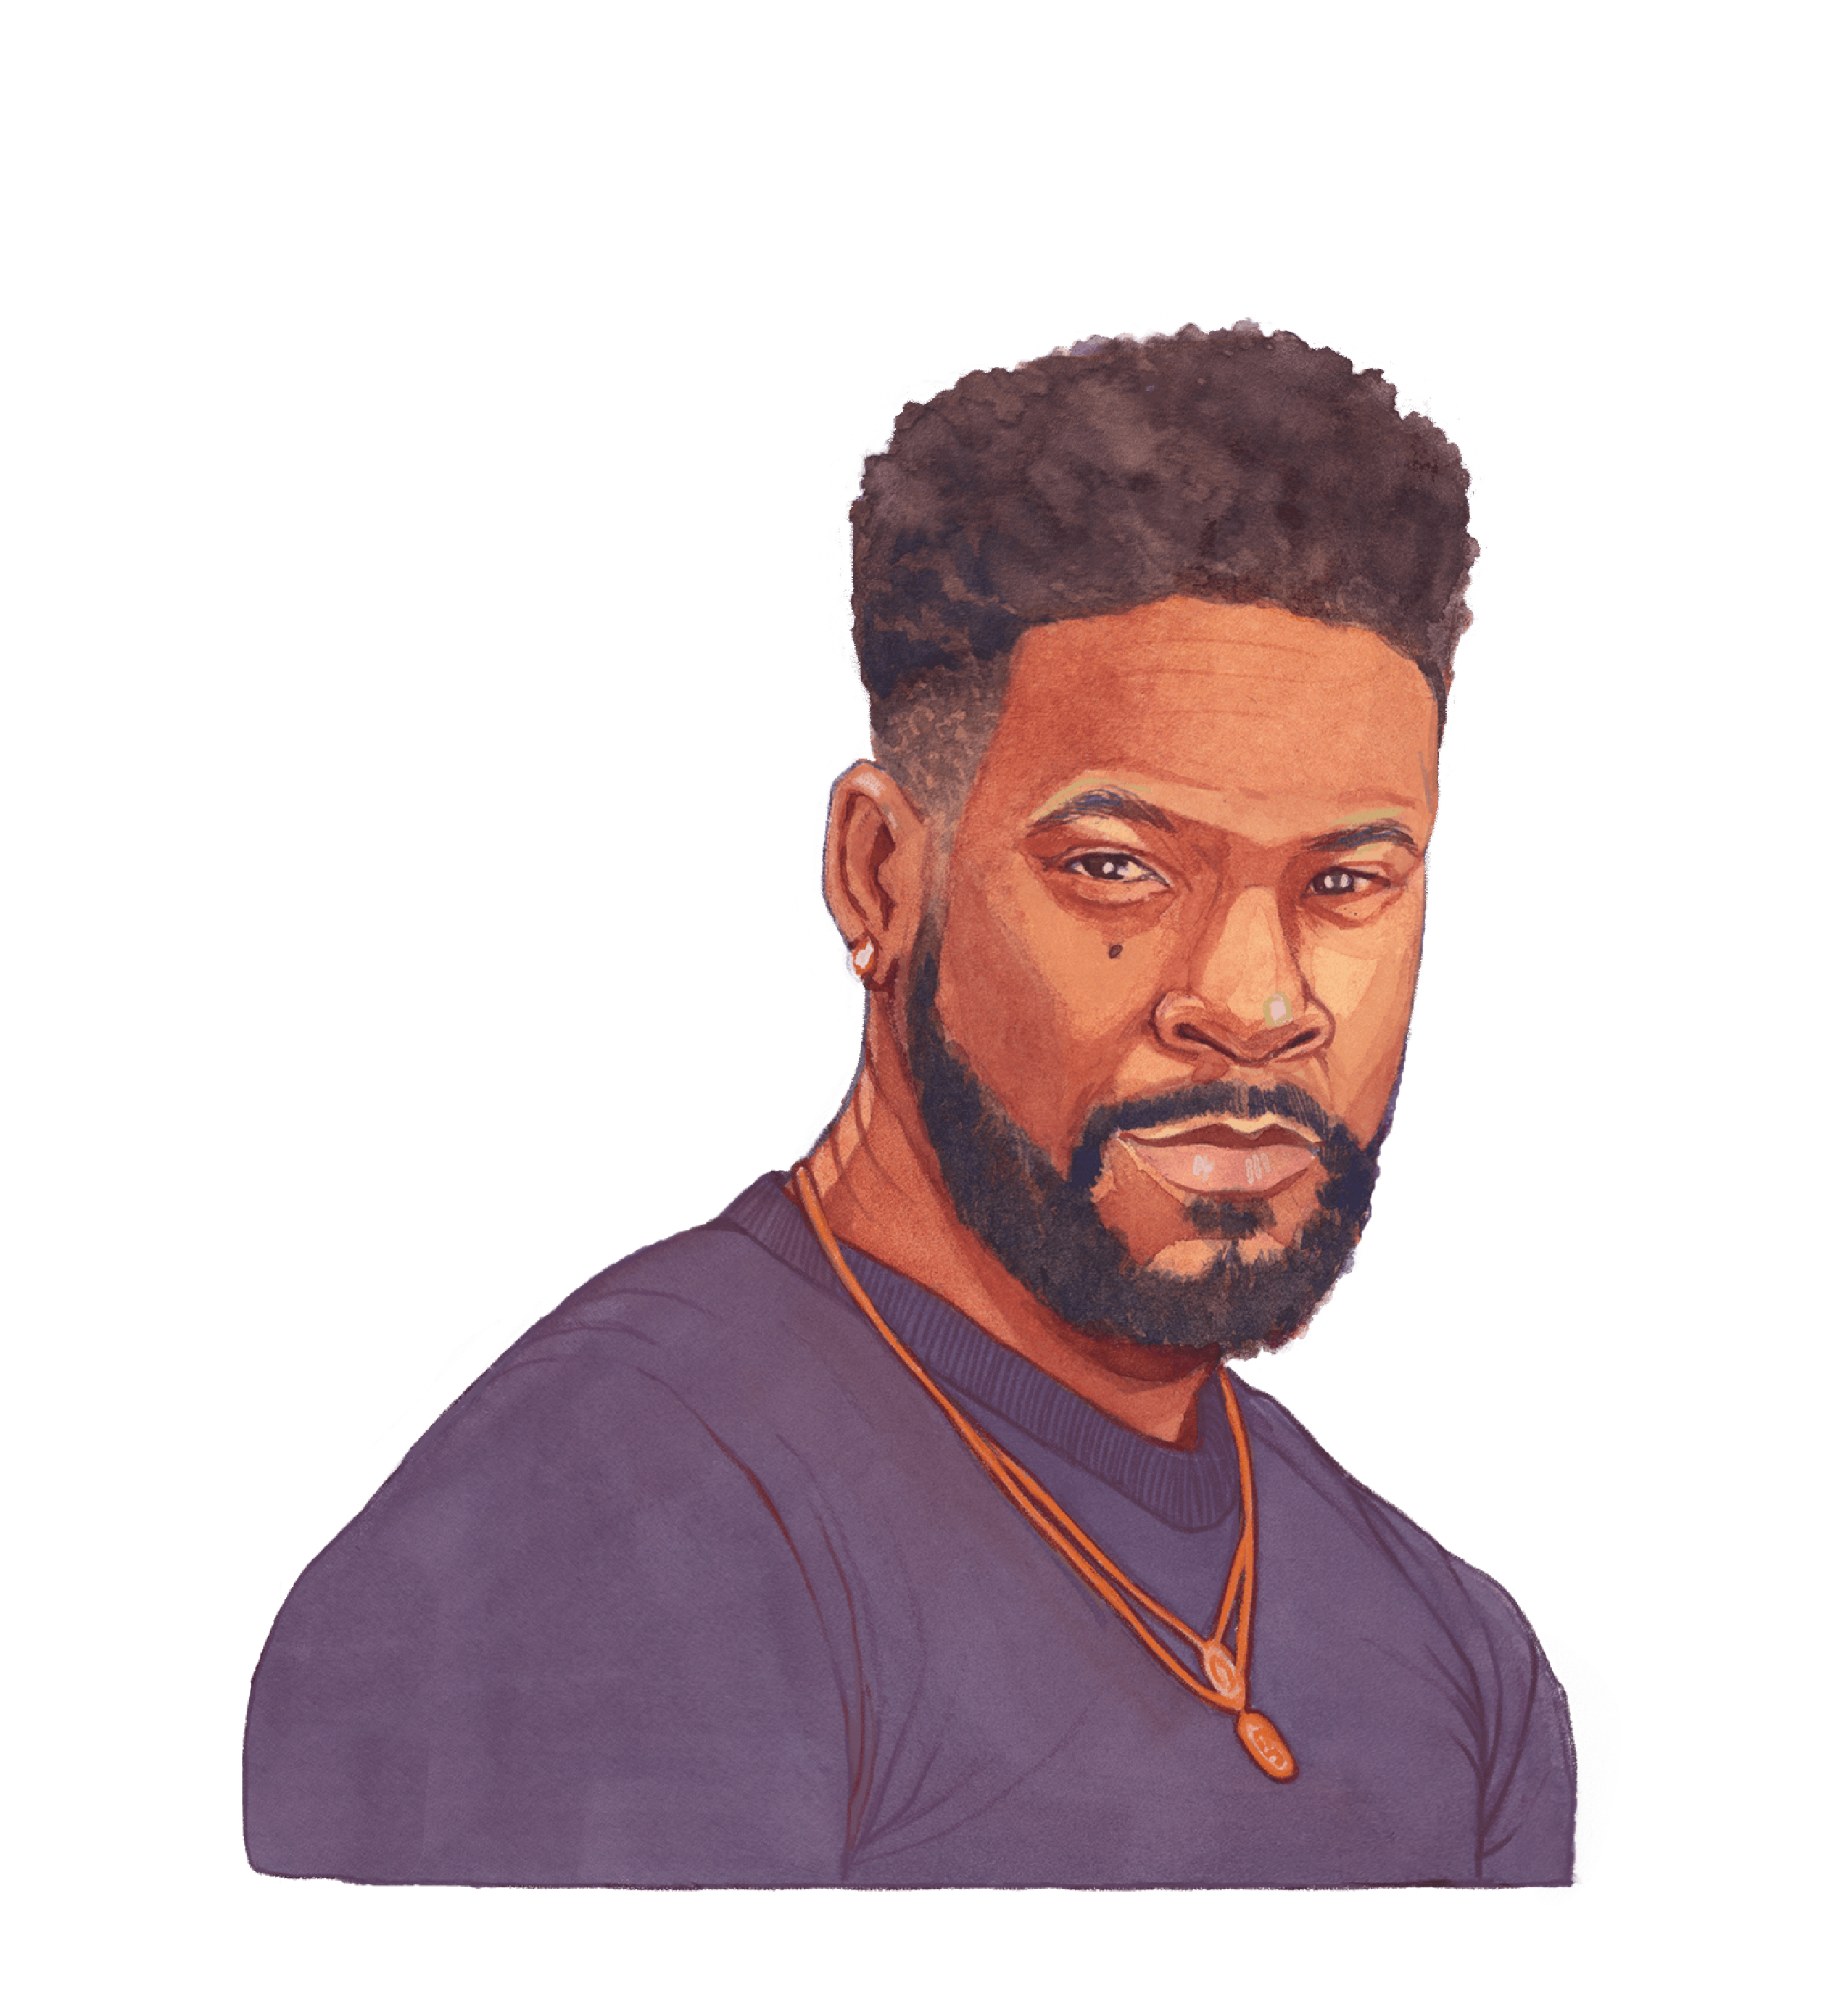 Color illustration of Basaime Spate, a person with a medium-dark skin tone wearing a necklace and dark purple shirt. They have dark brown hair and a beard with a determined expression on their face.